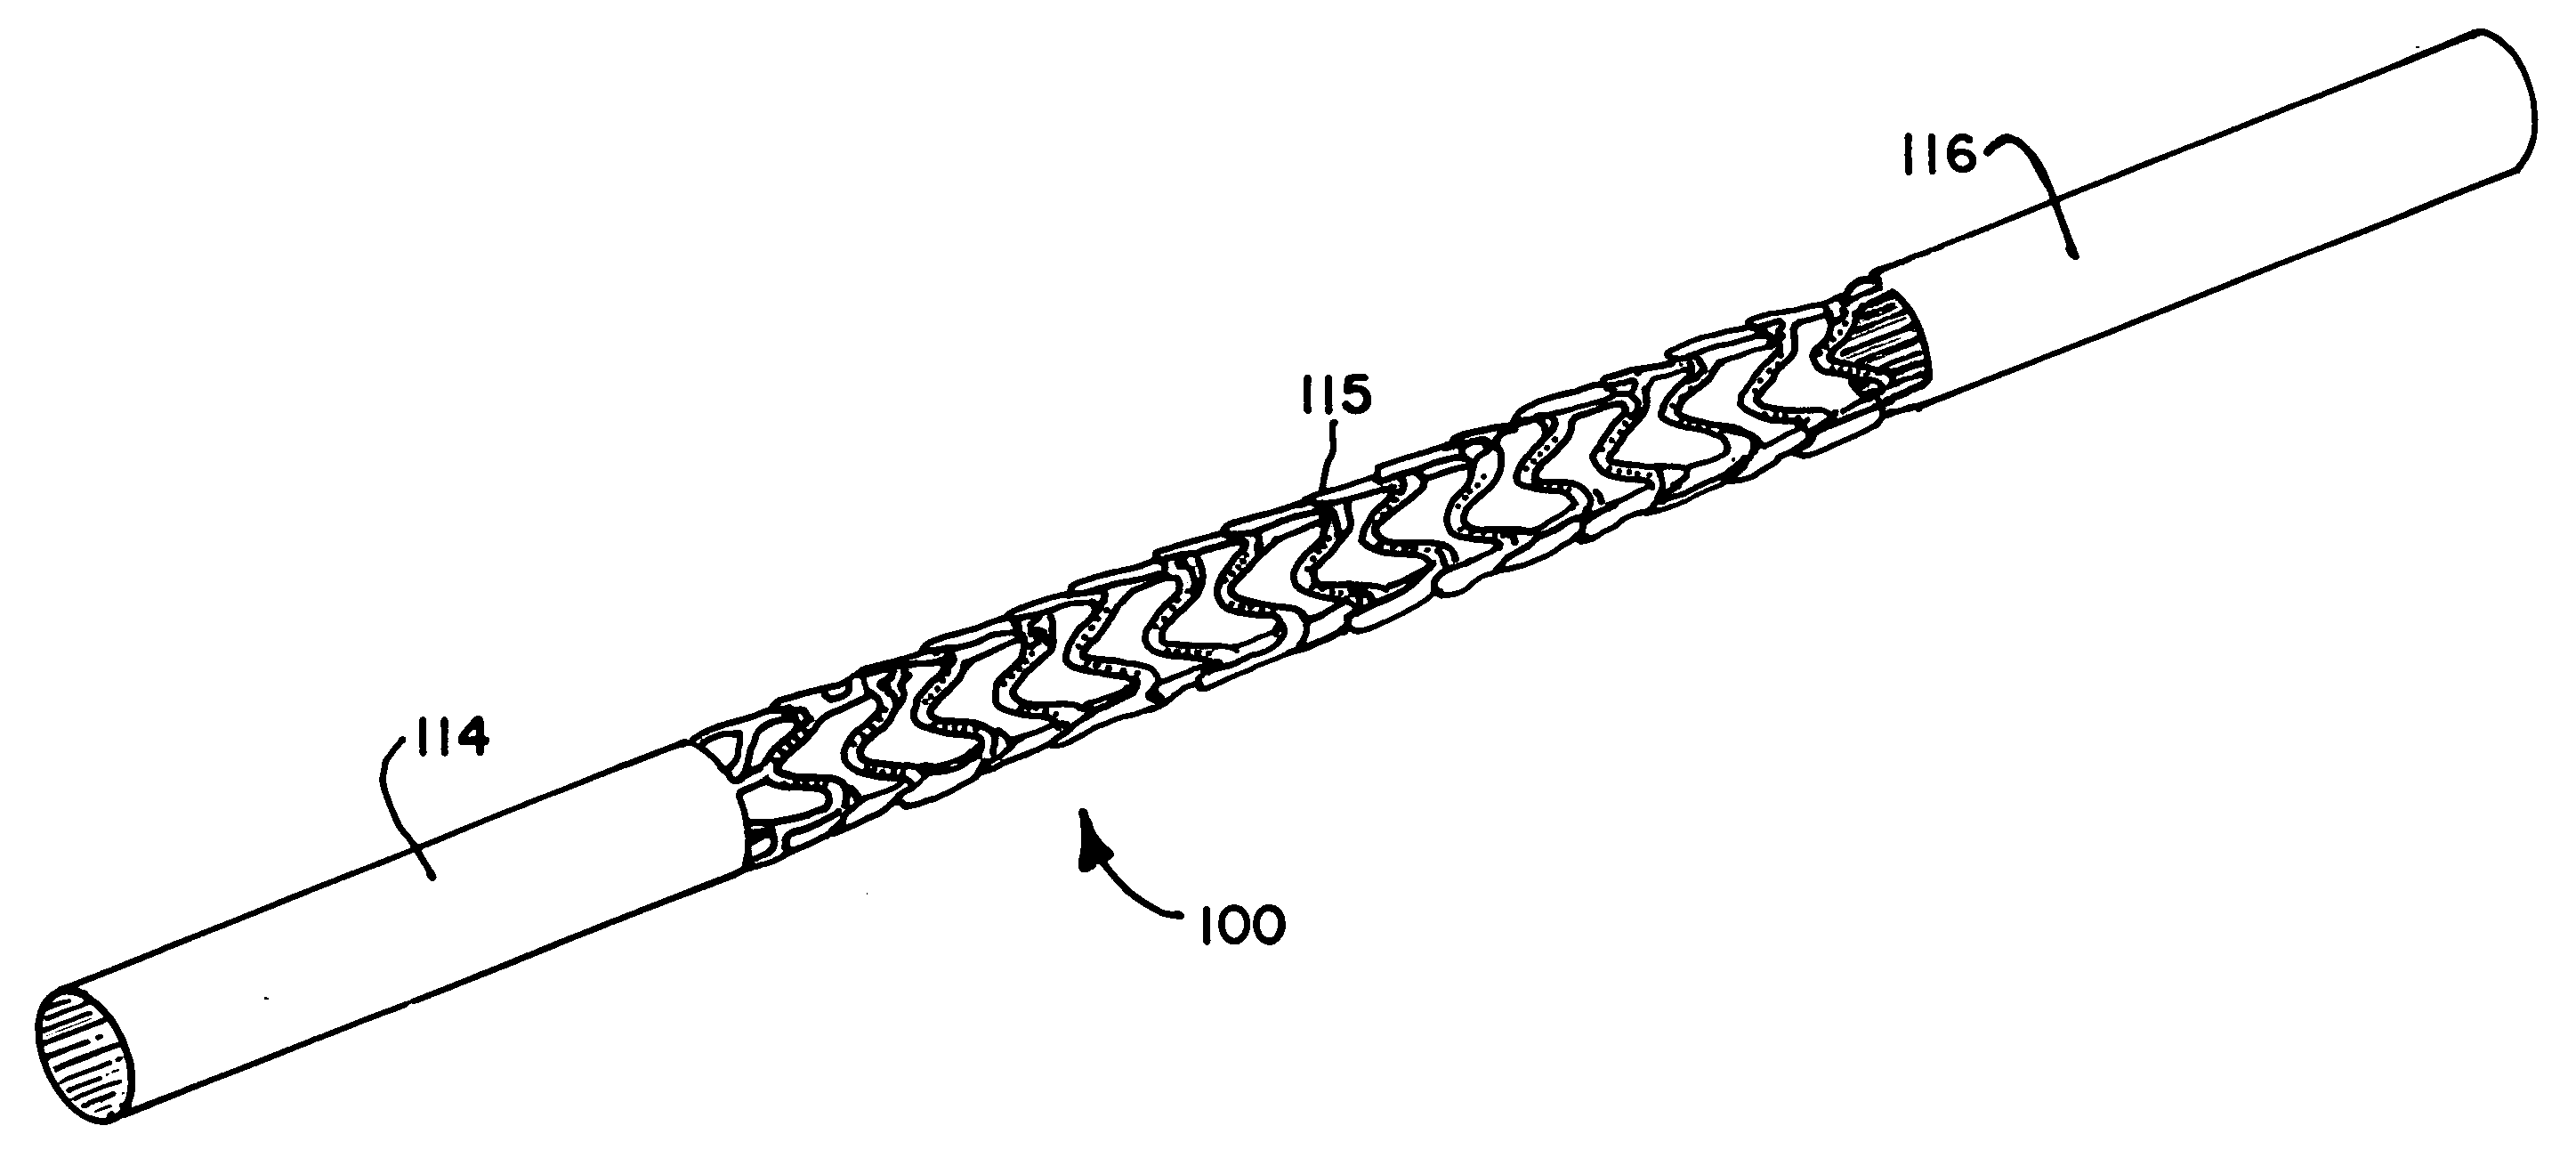 Pitted metallic implants and method of manufacturing thereof